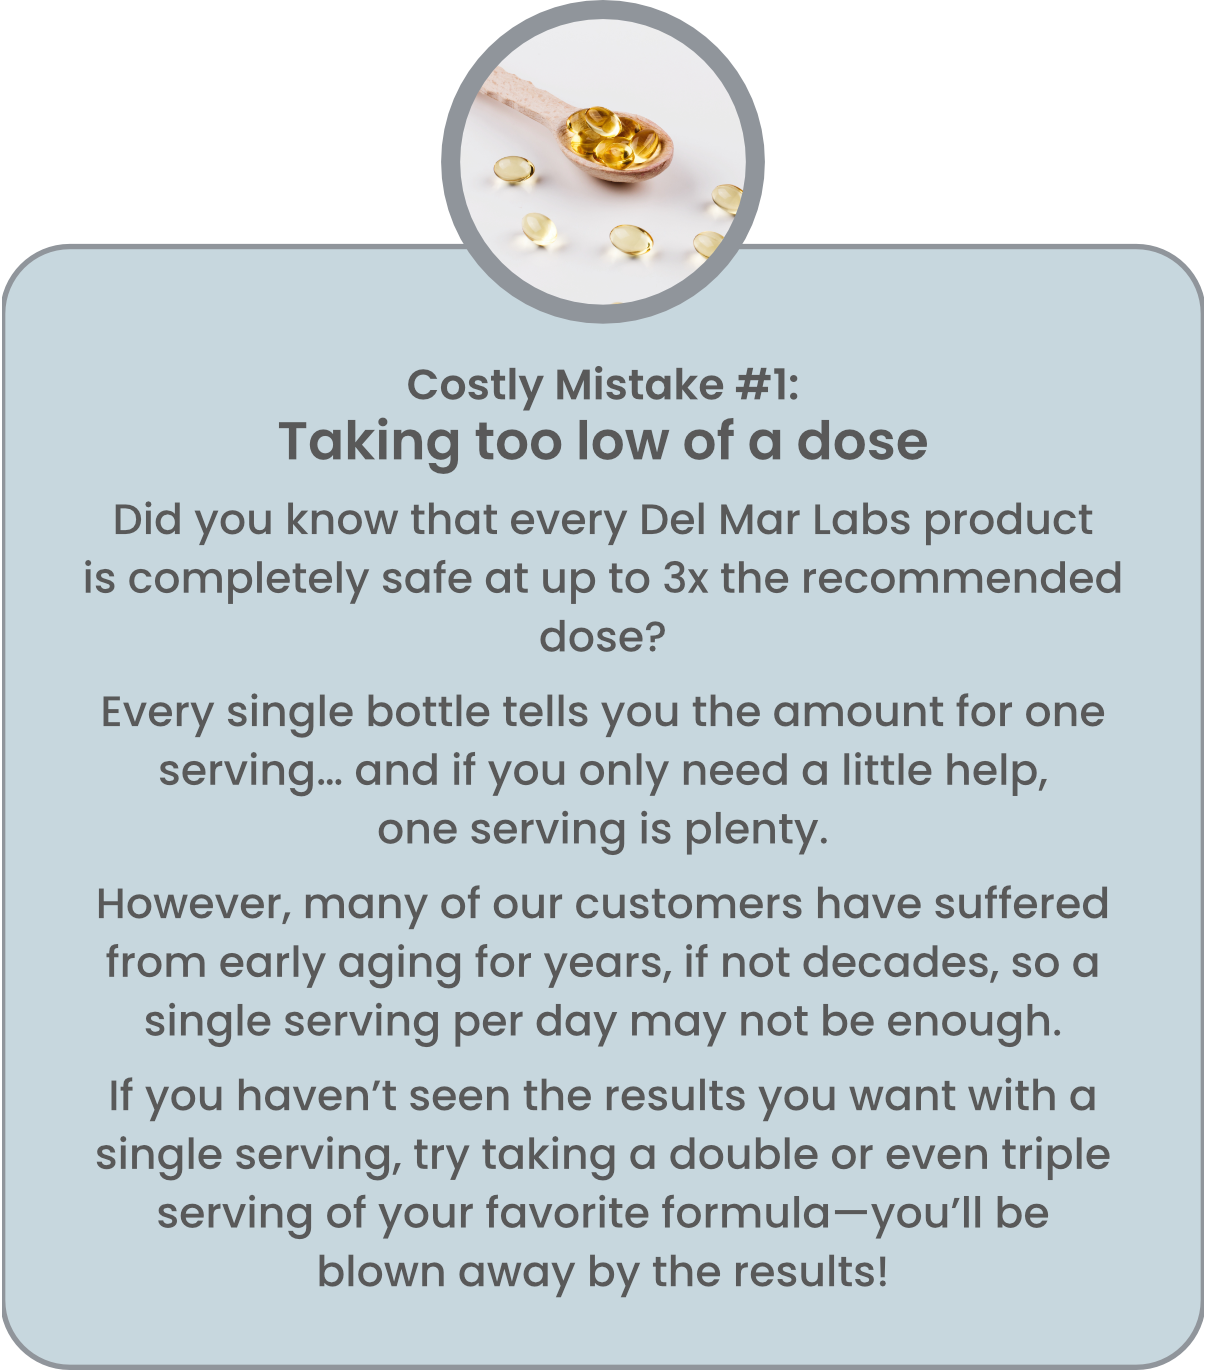 Costly Mistake #1: Taking too low of a dose